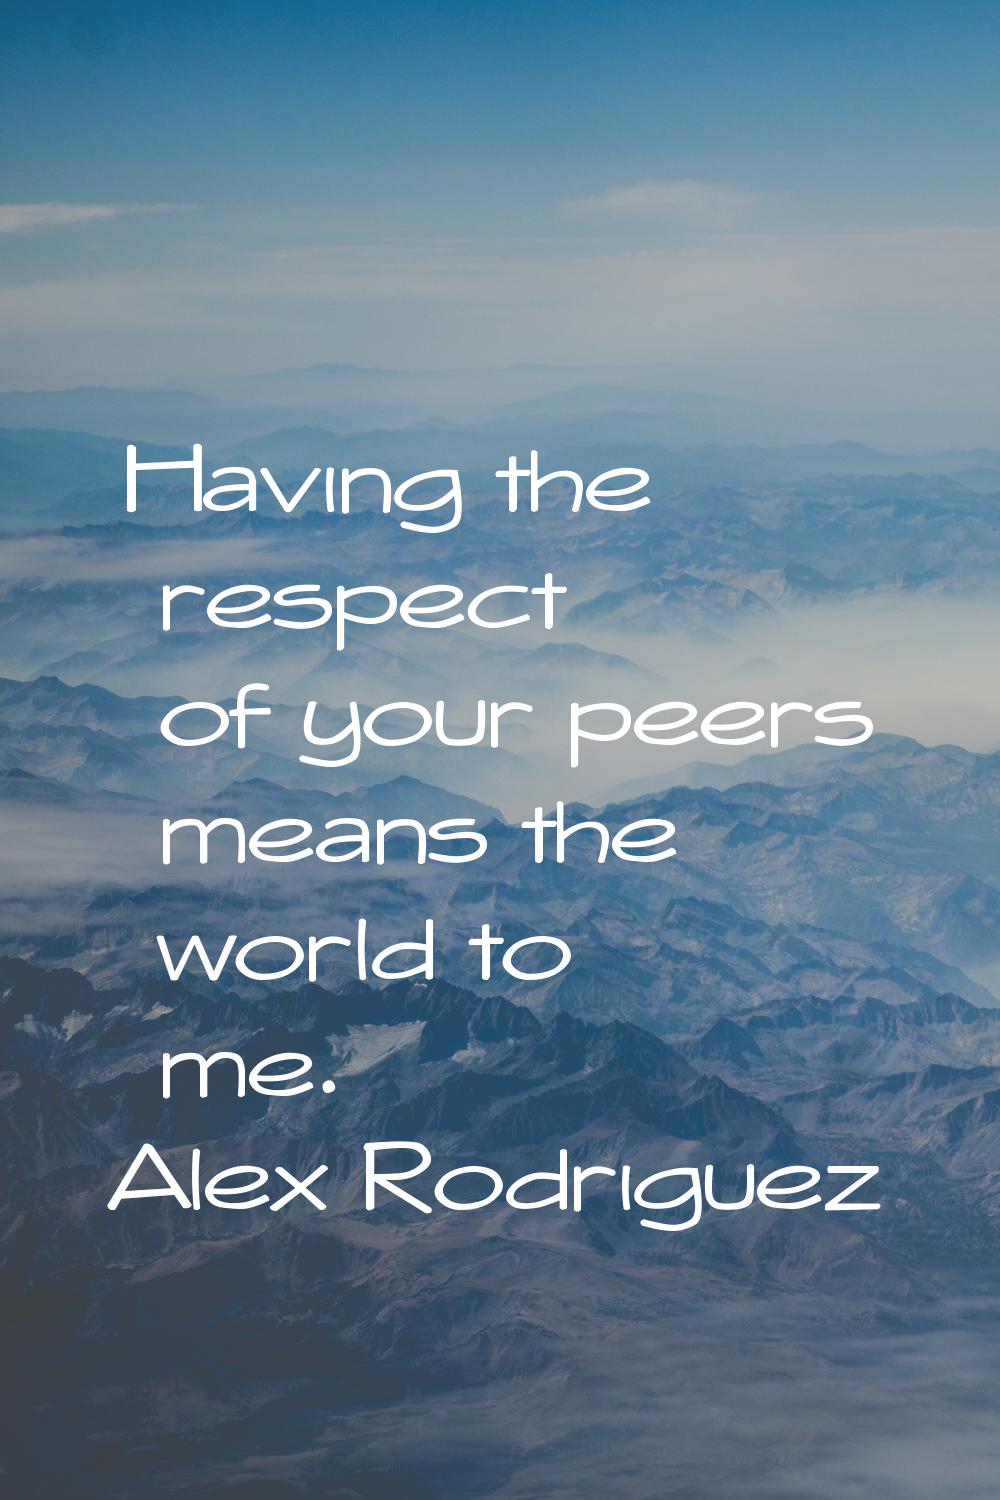 Having the respect of your peers means the world to me.